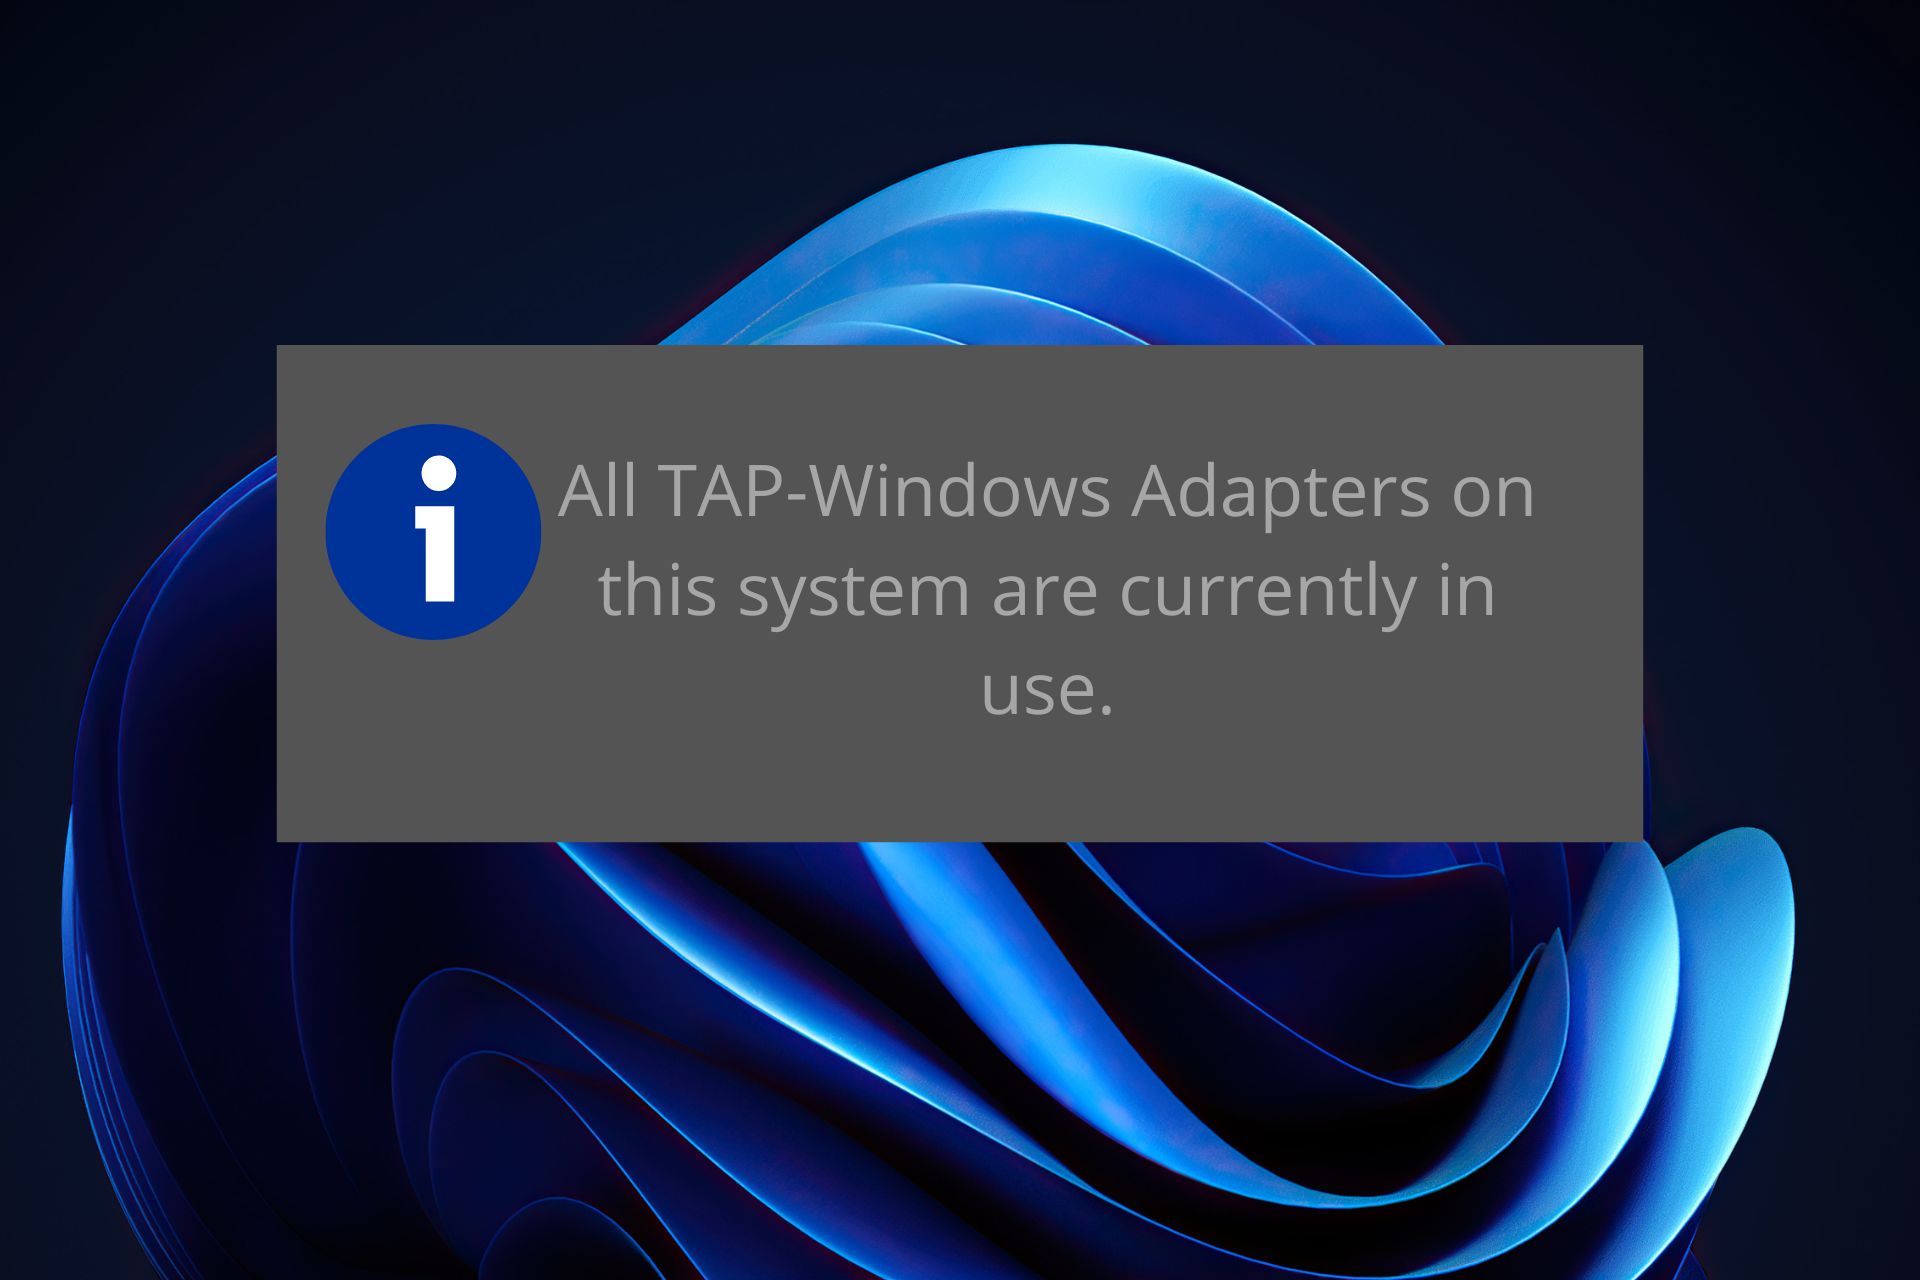 All TAP-Windows Adapters on this system are currently in use.